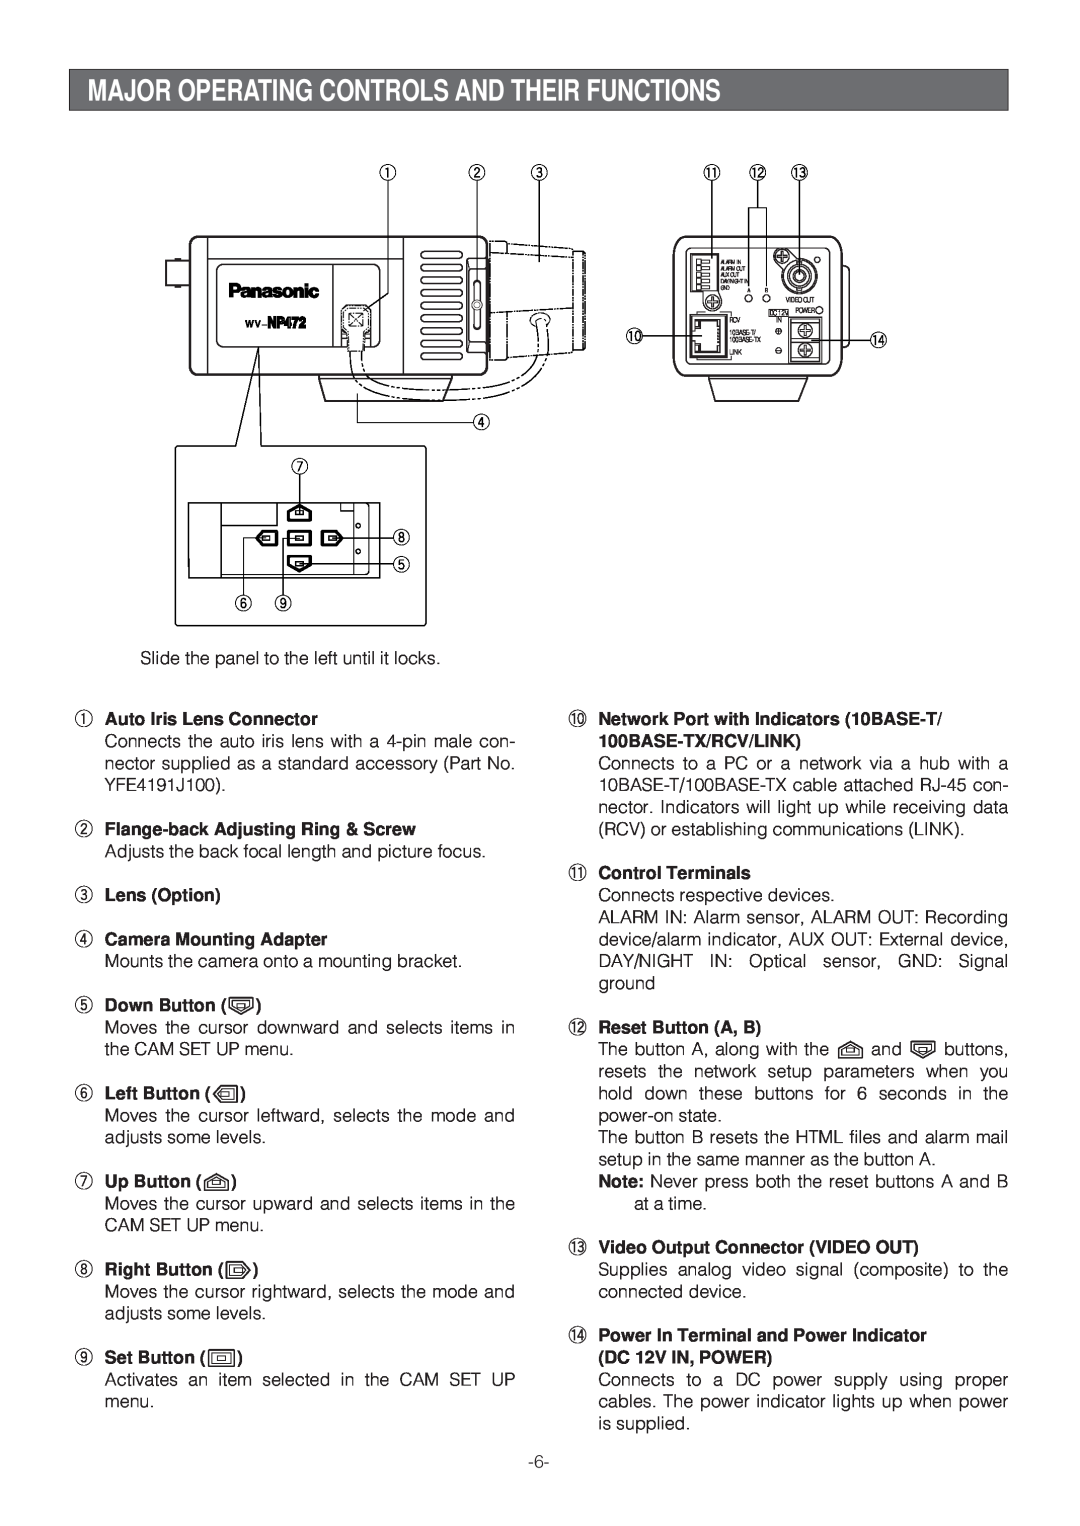 Panasonic WV-NP472E operating instructions Major Operating Controls And Their Functions 